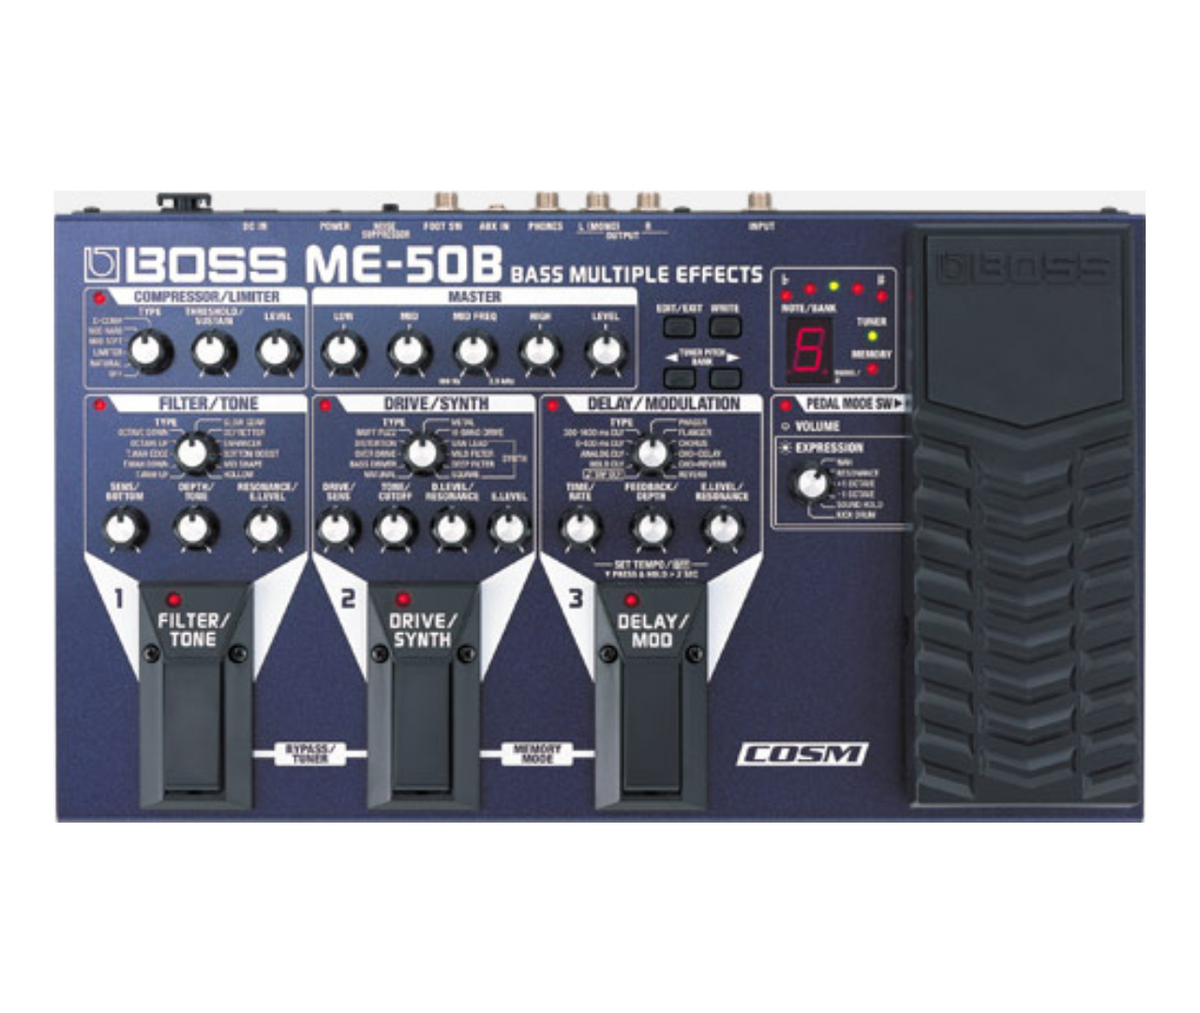 BOSS ME-50B Bass Multiple Effects Best Guitar Effects Pedal Compressor/Limiter, Master Filter/Tone, Drive/Synth, Delay/Modulation and Expression Pedal